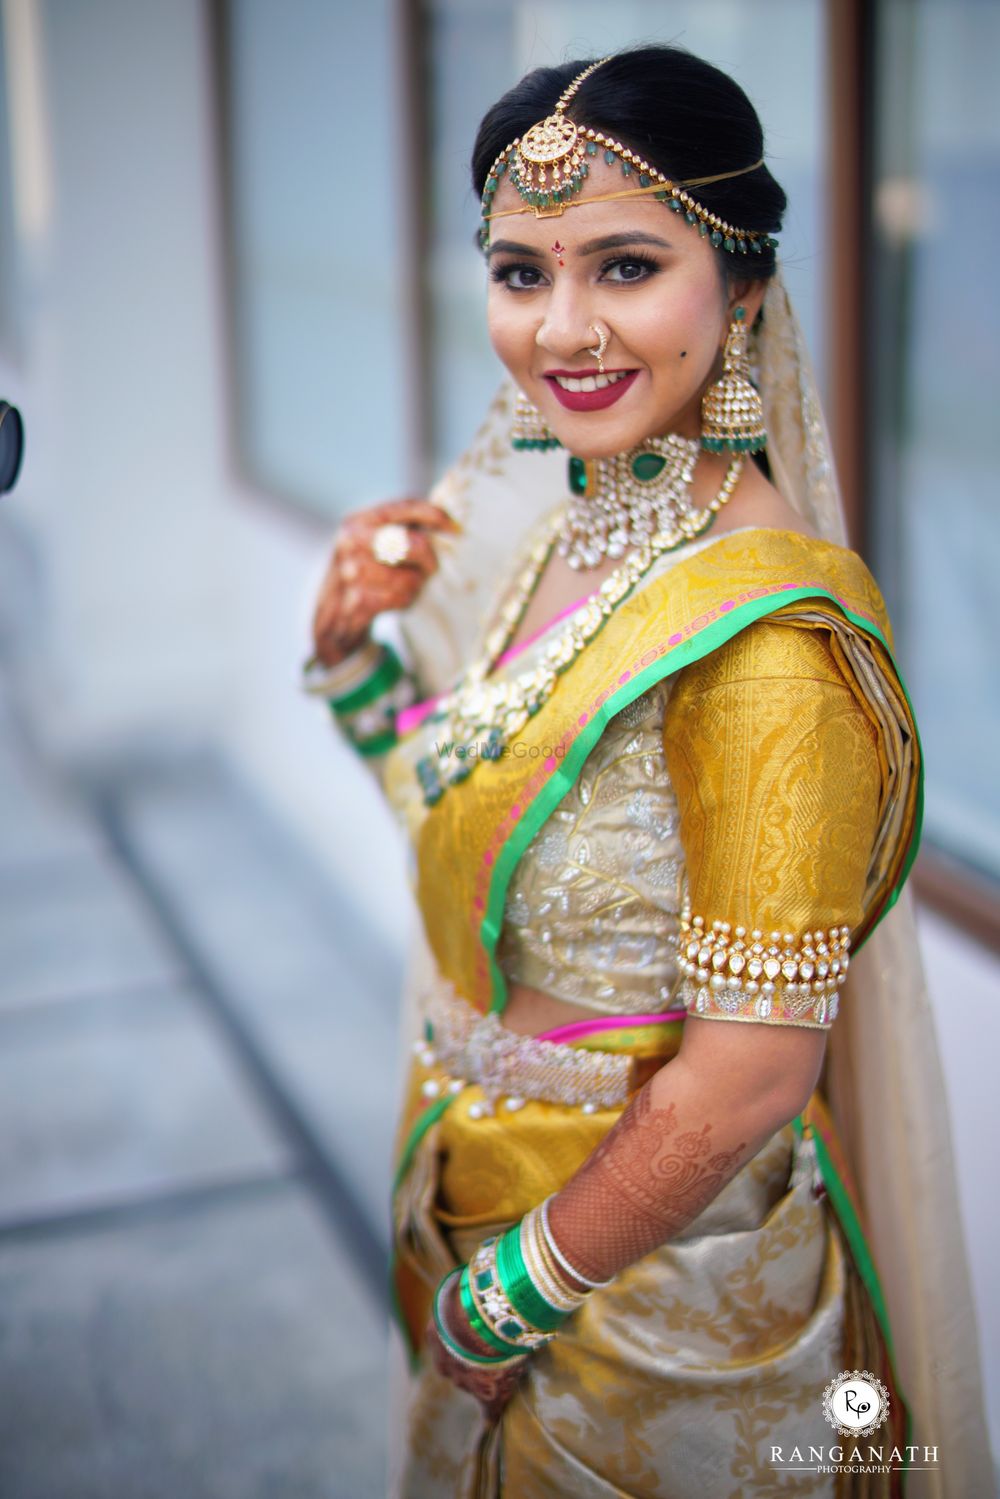 Photo From Wedding Looks! - By Make-up by Afsha Rangila